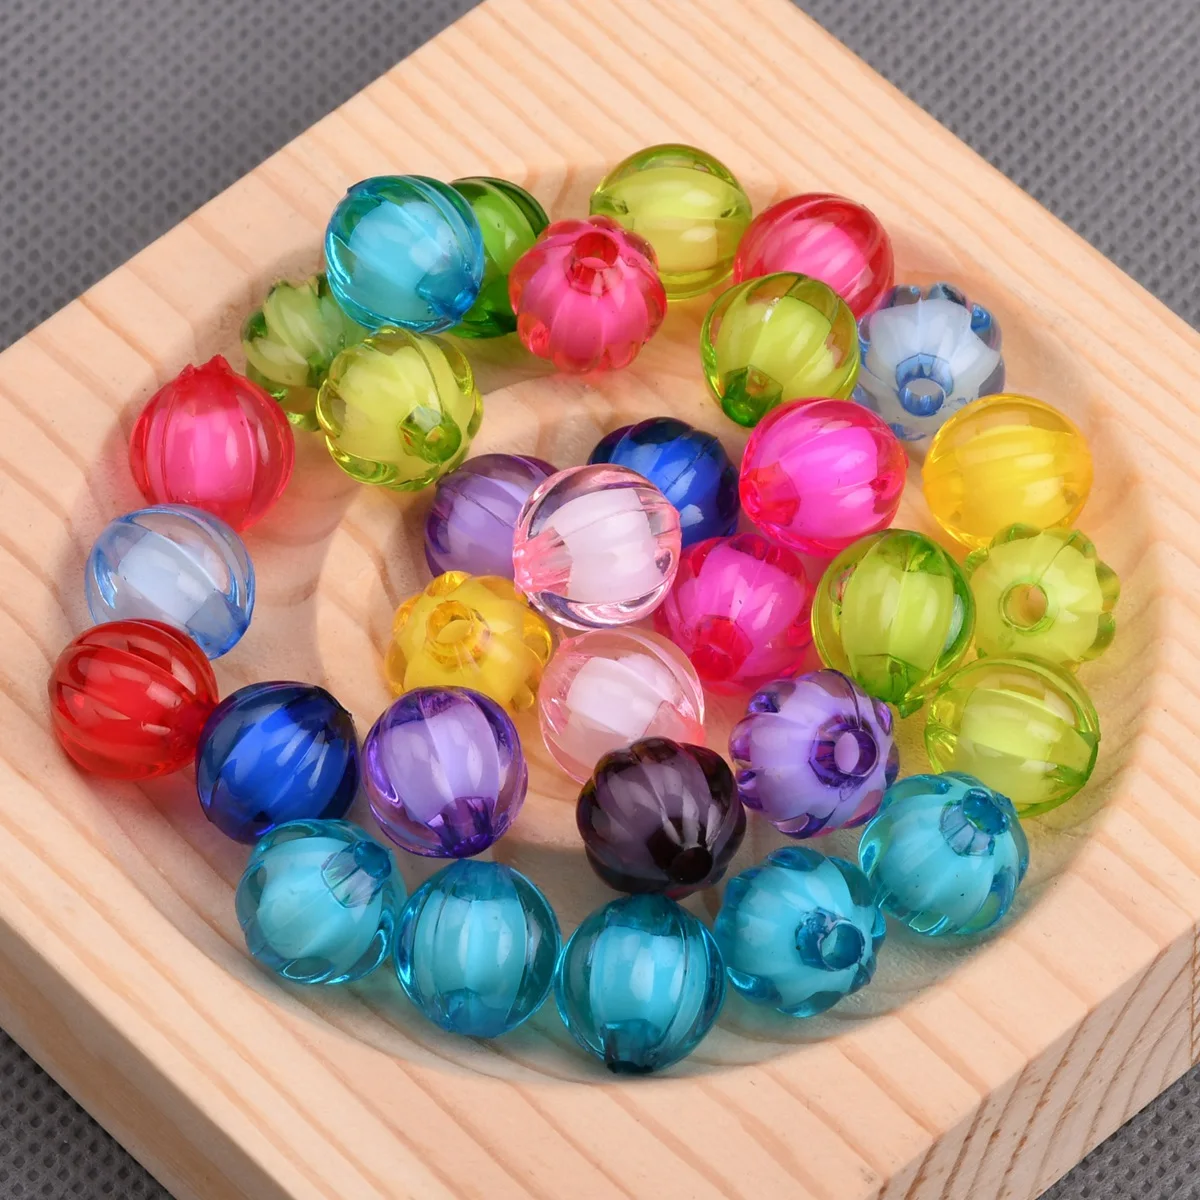 50pcs Round Pumpkin Shape 8mm 10mm 12mm Acrylic Plastic Loose Beads Wholesale Bulk Lot For Jewelry Making Findings